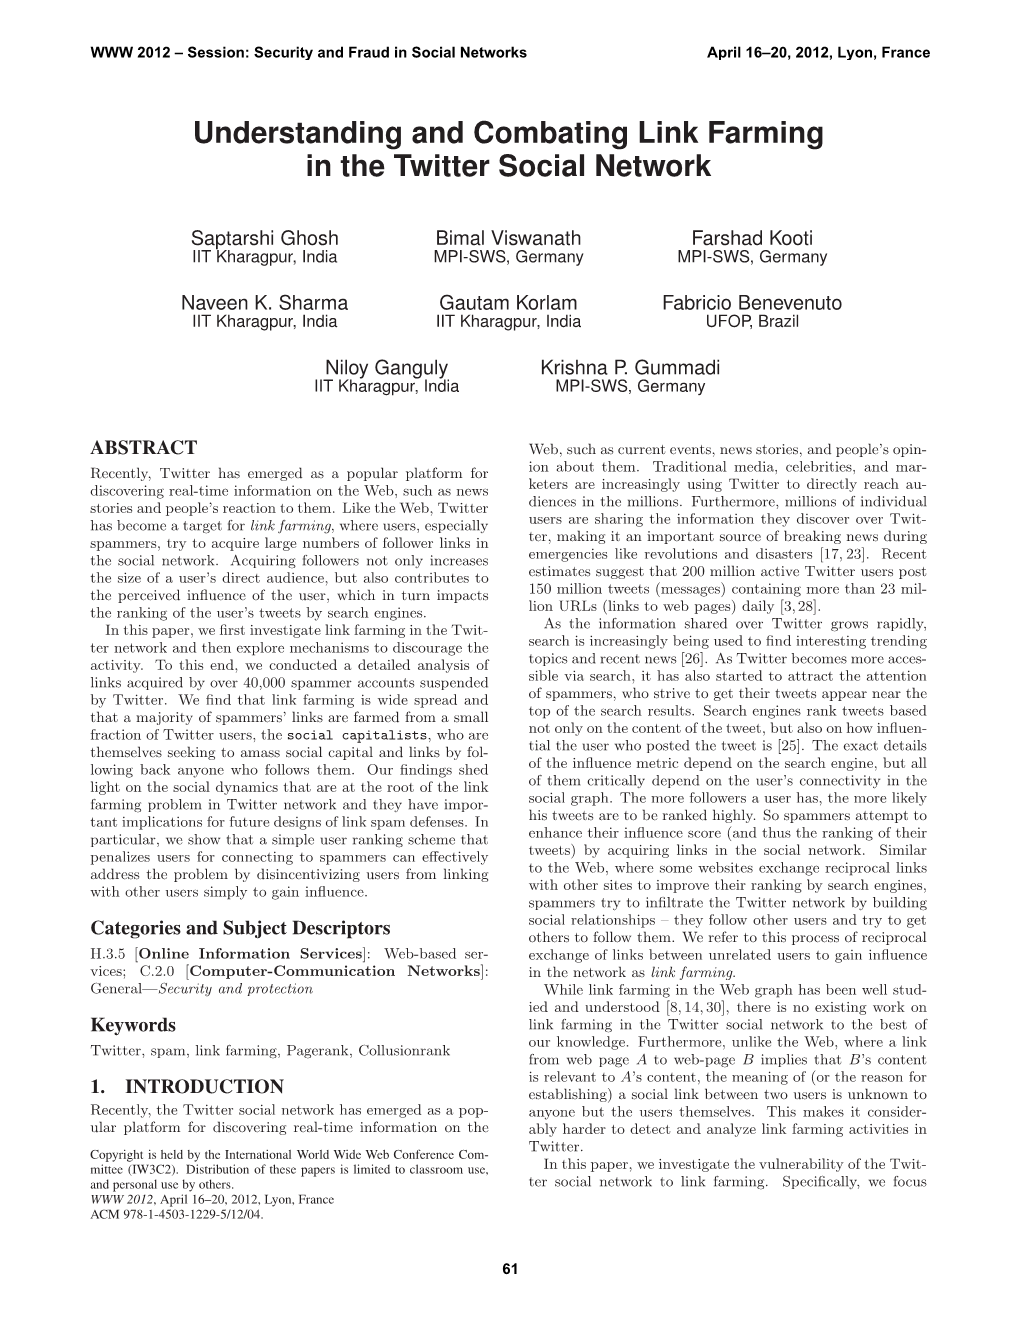 Understanding and Combating Link Farming in the Twitter Social Network